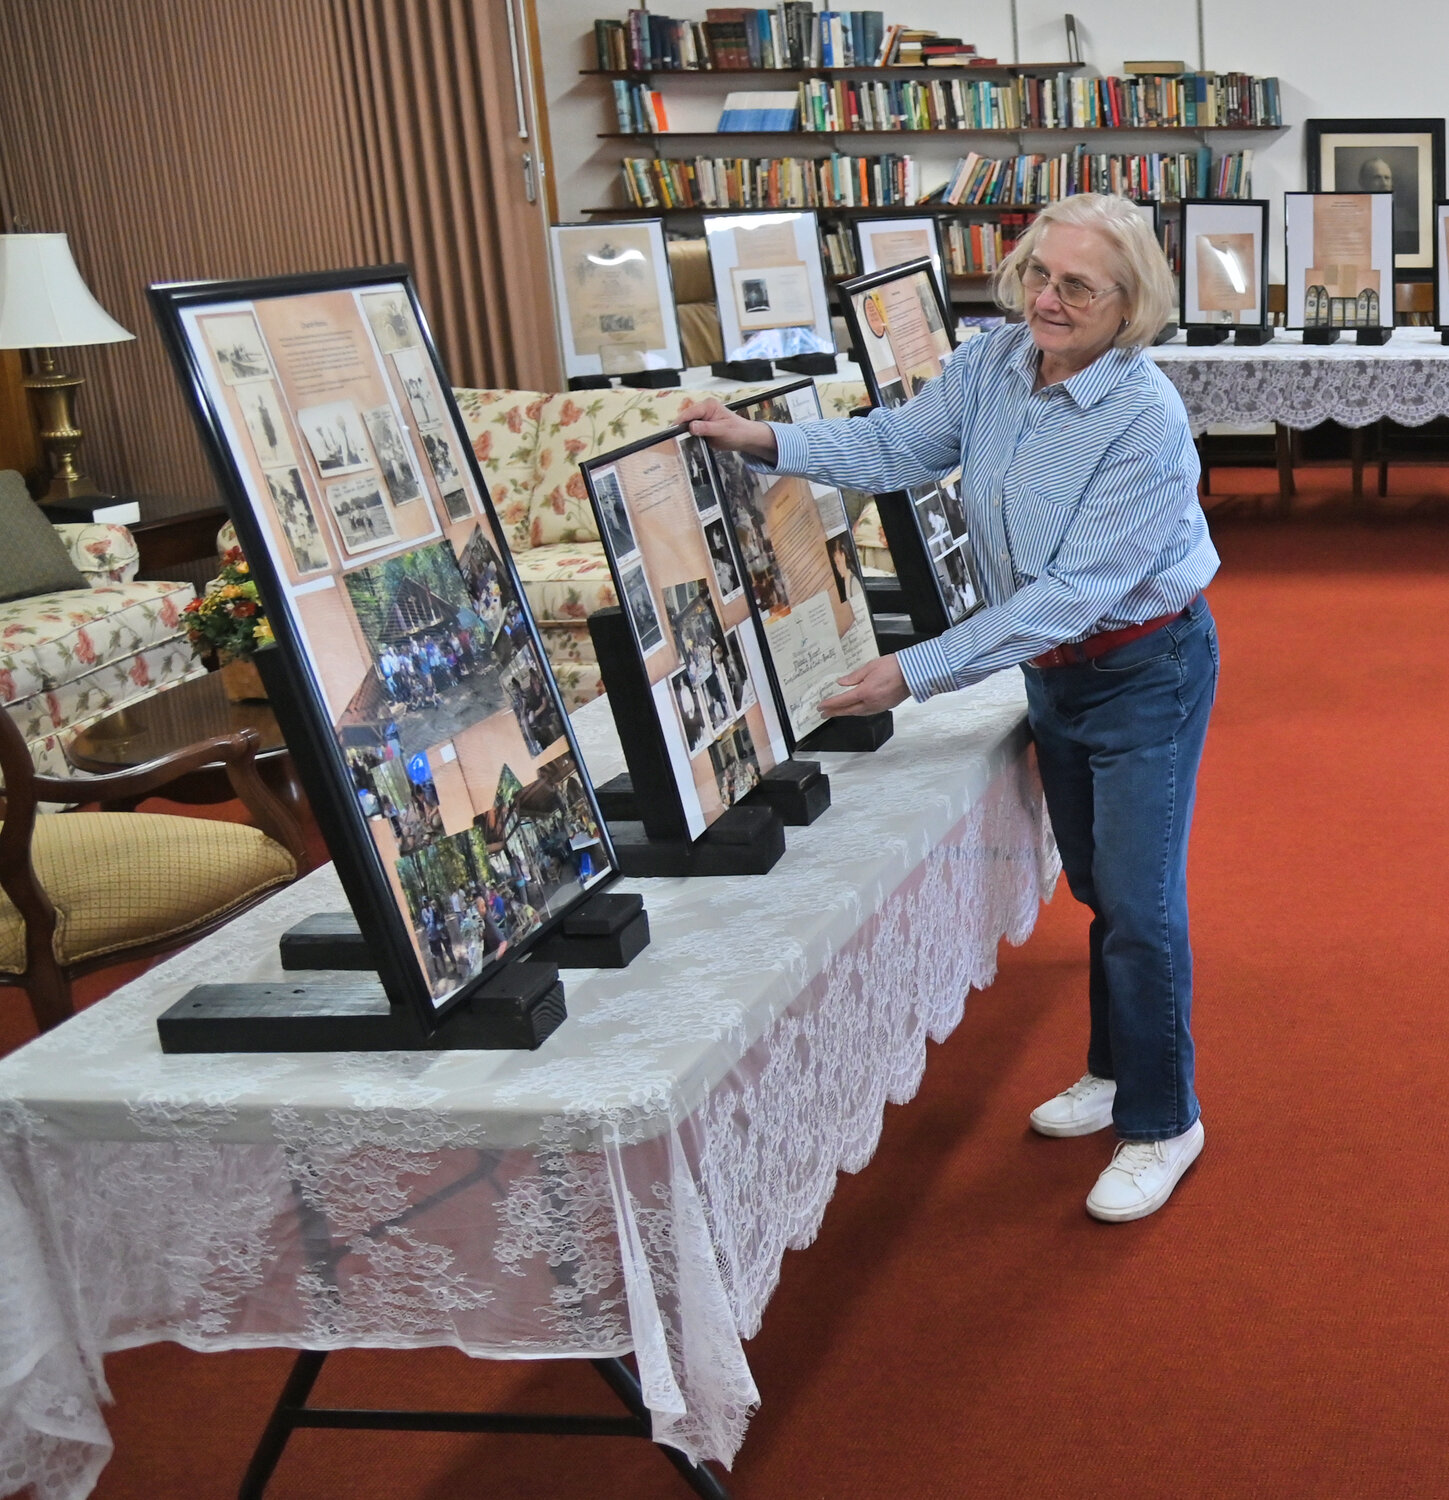 Trinity Church activities director and historian Melody Milewski straightens some framed history boards that are on display in the church lounge for its 175th anniversary celebration in April. Milewski collected and framed all the old photos and documents, including confirmation certificates in both English and German.